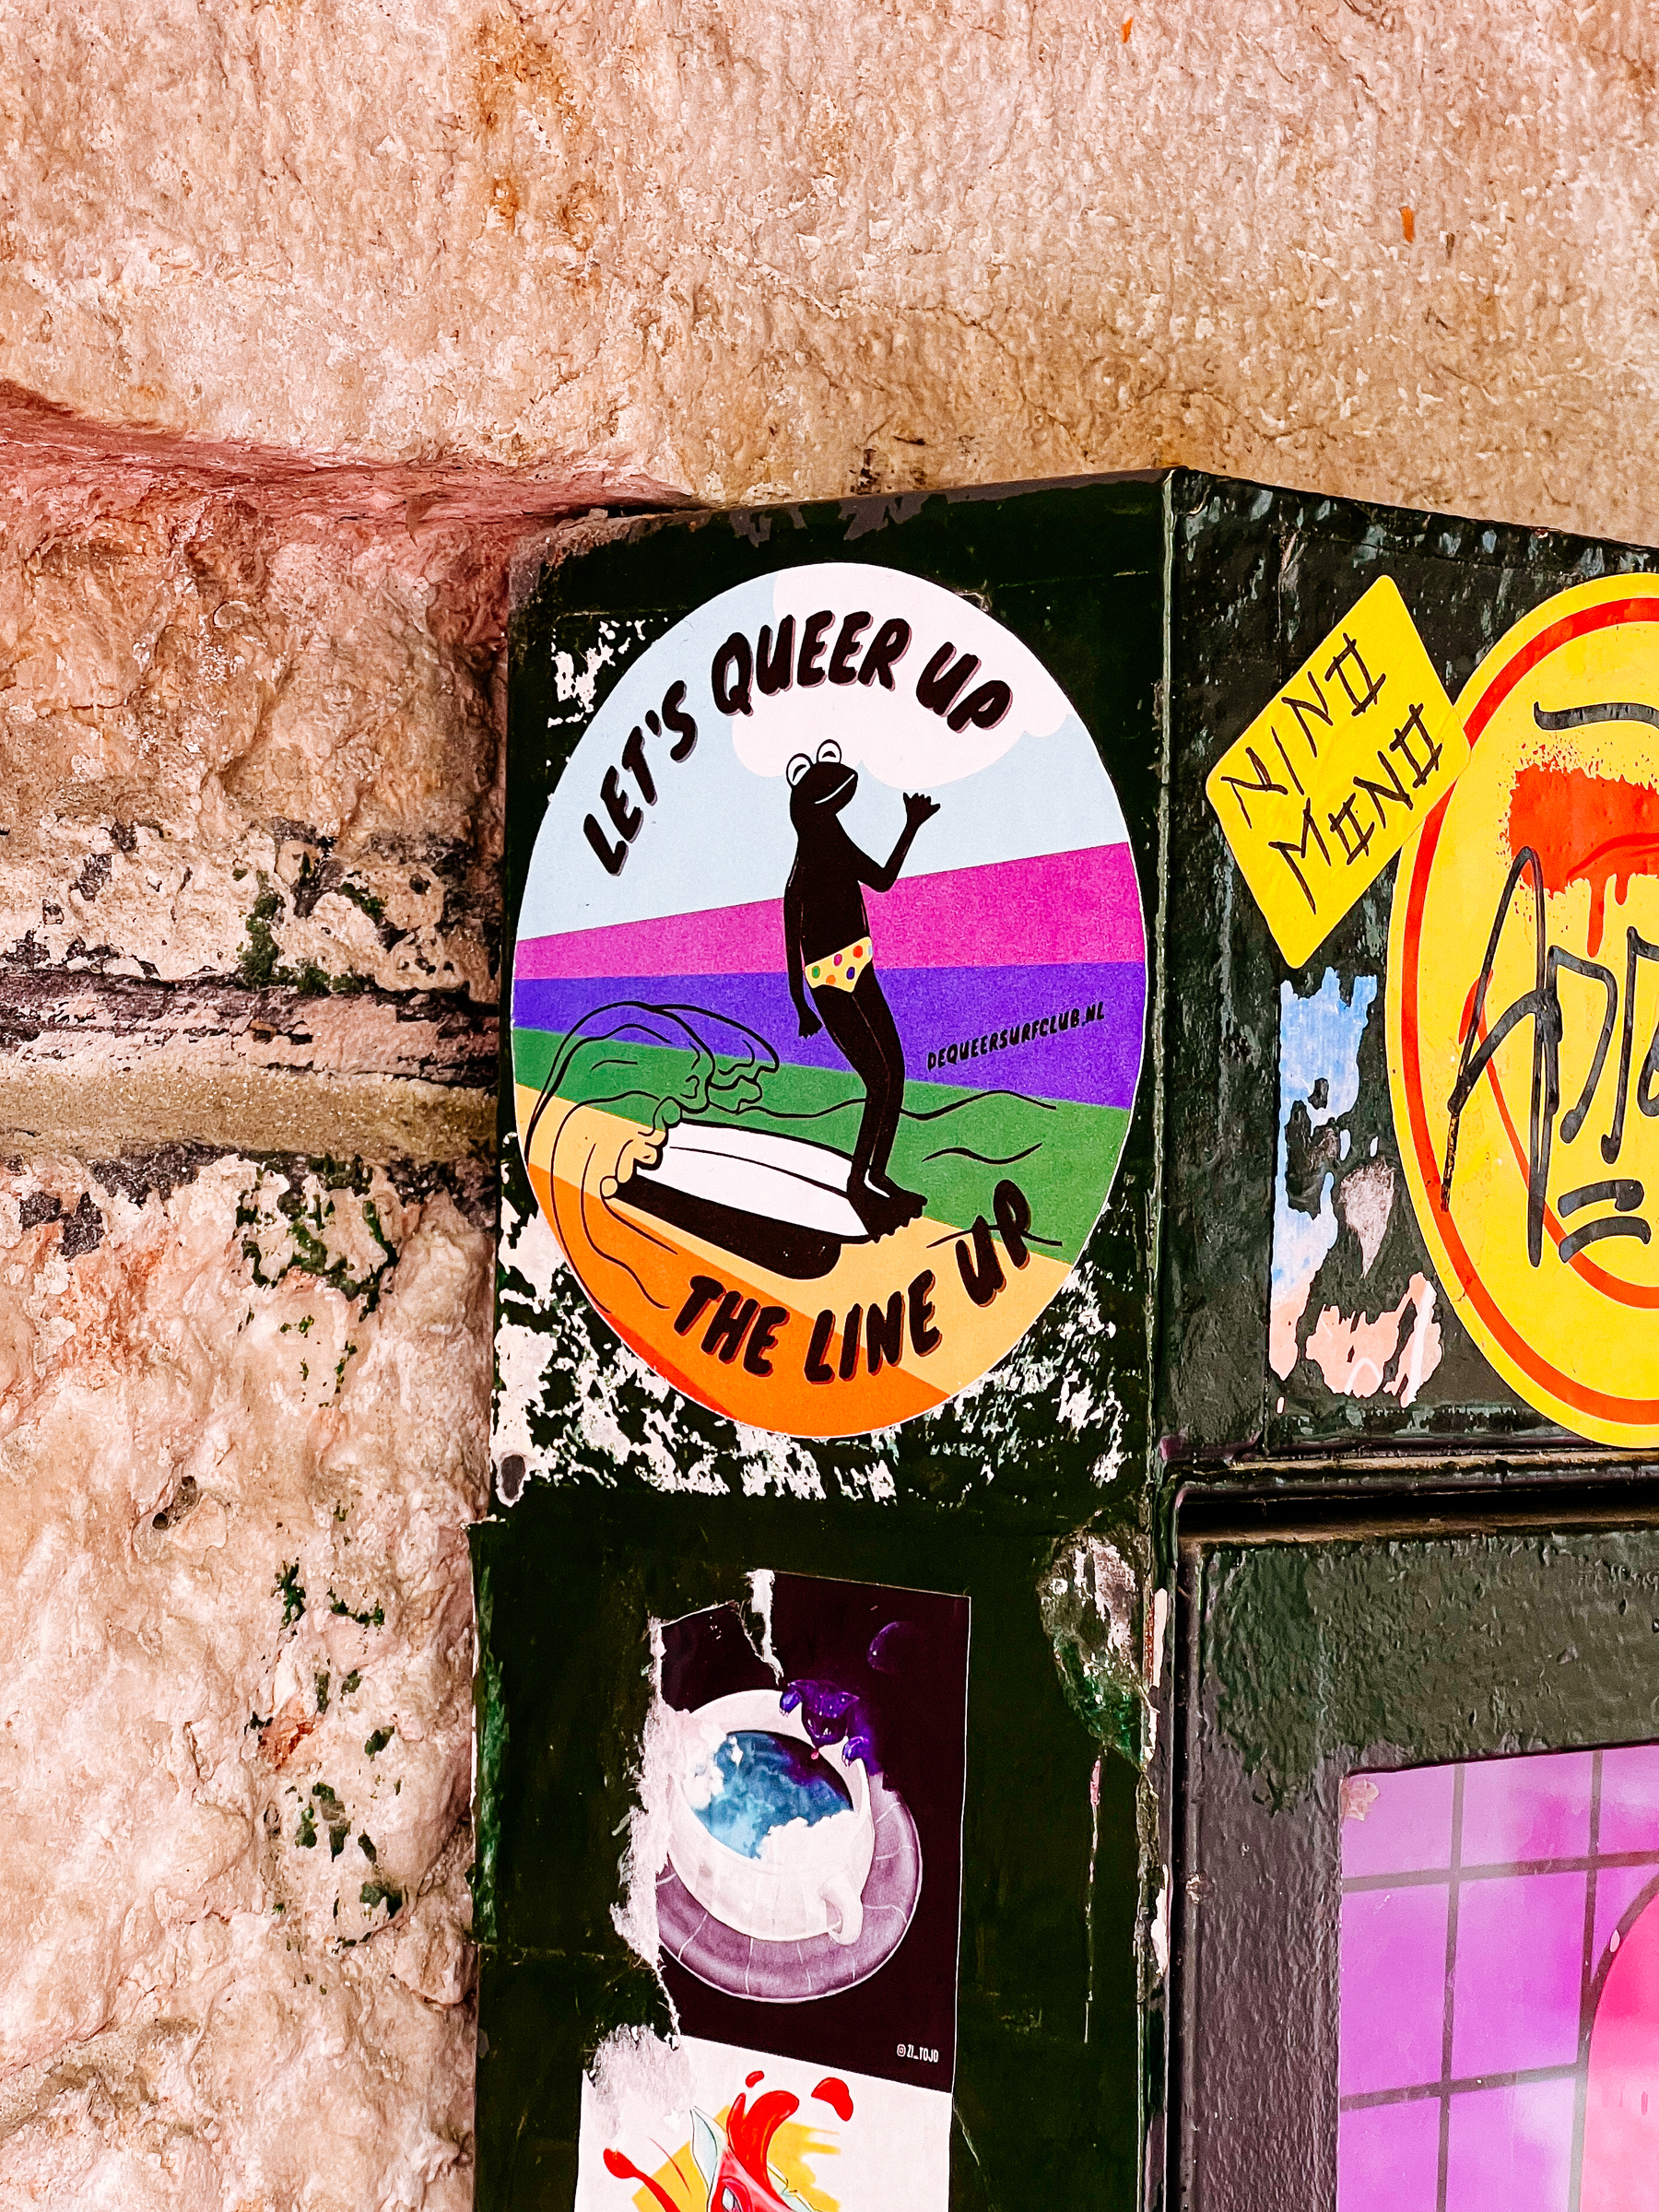 “Let’s queer up the line-up”, and a frog surfing a rainbow wave. A sticker. 